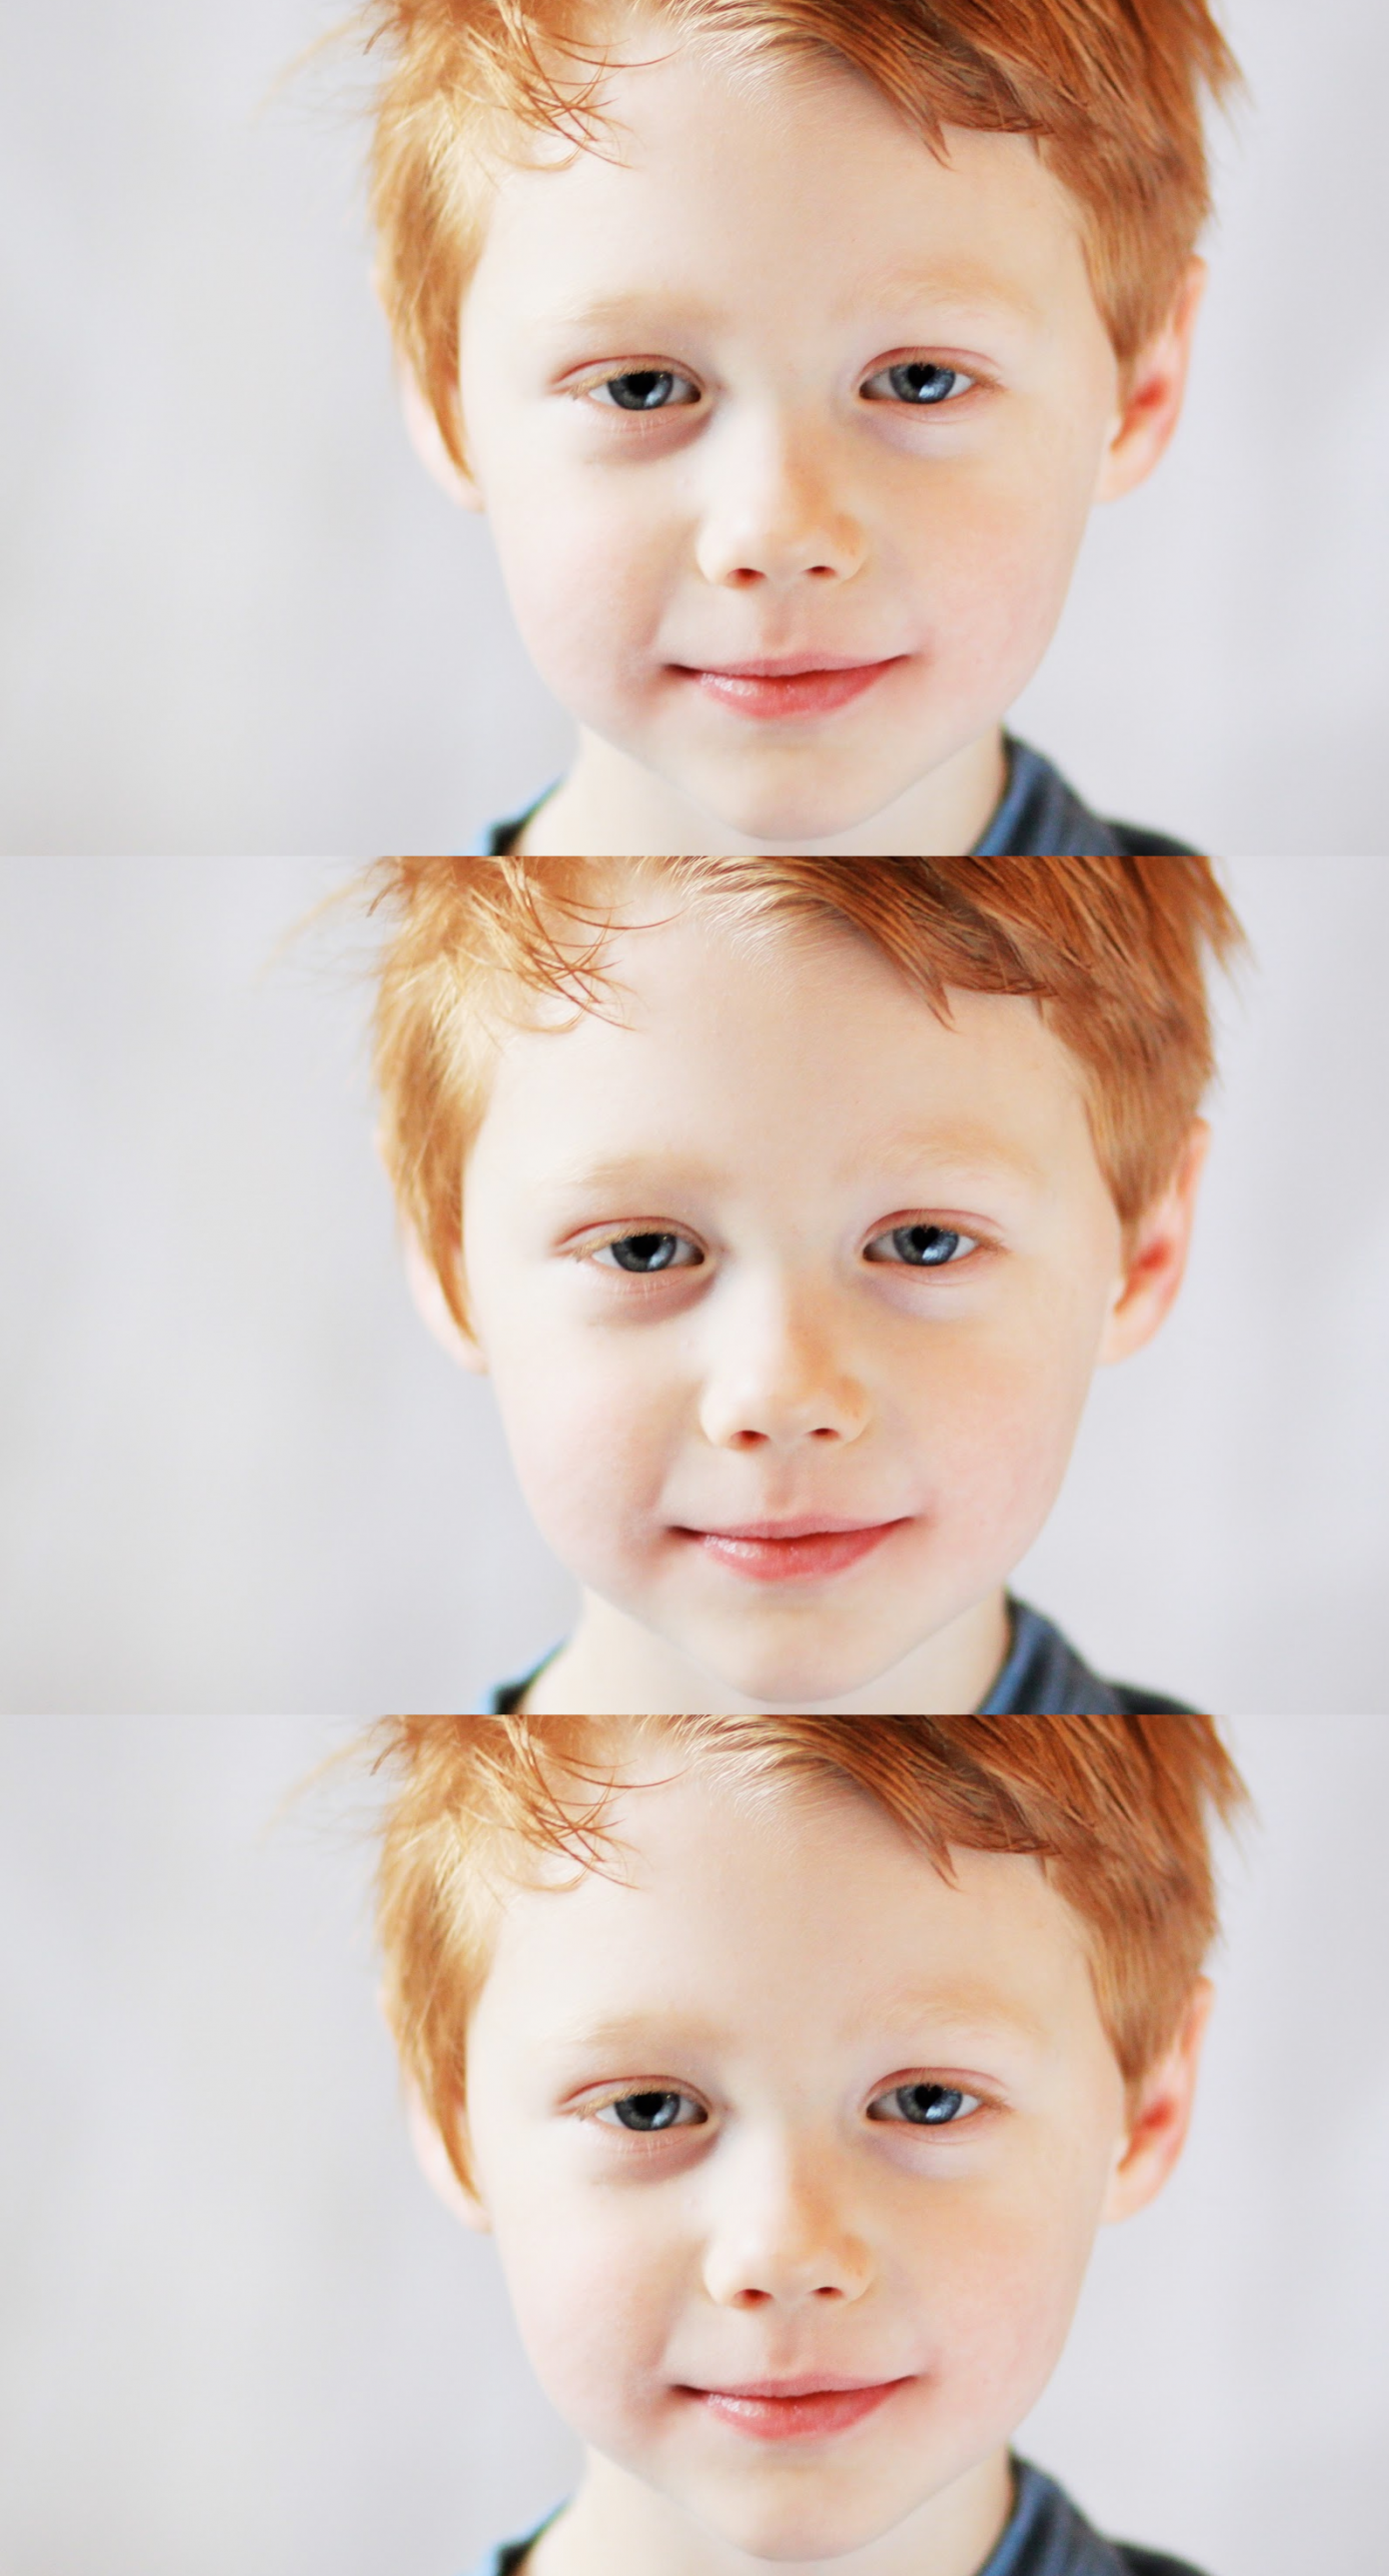 Calm and contented red-headed boy x3 Blank Meme Template